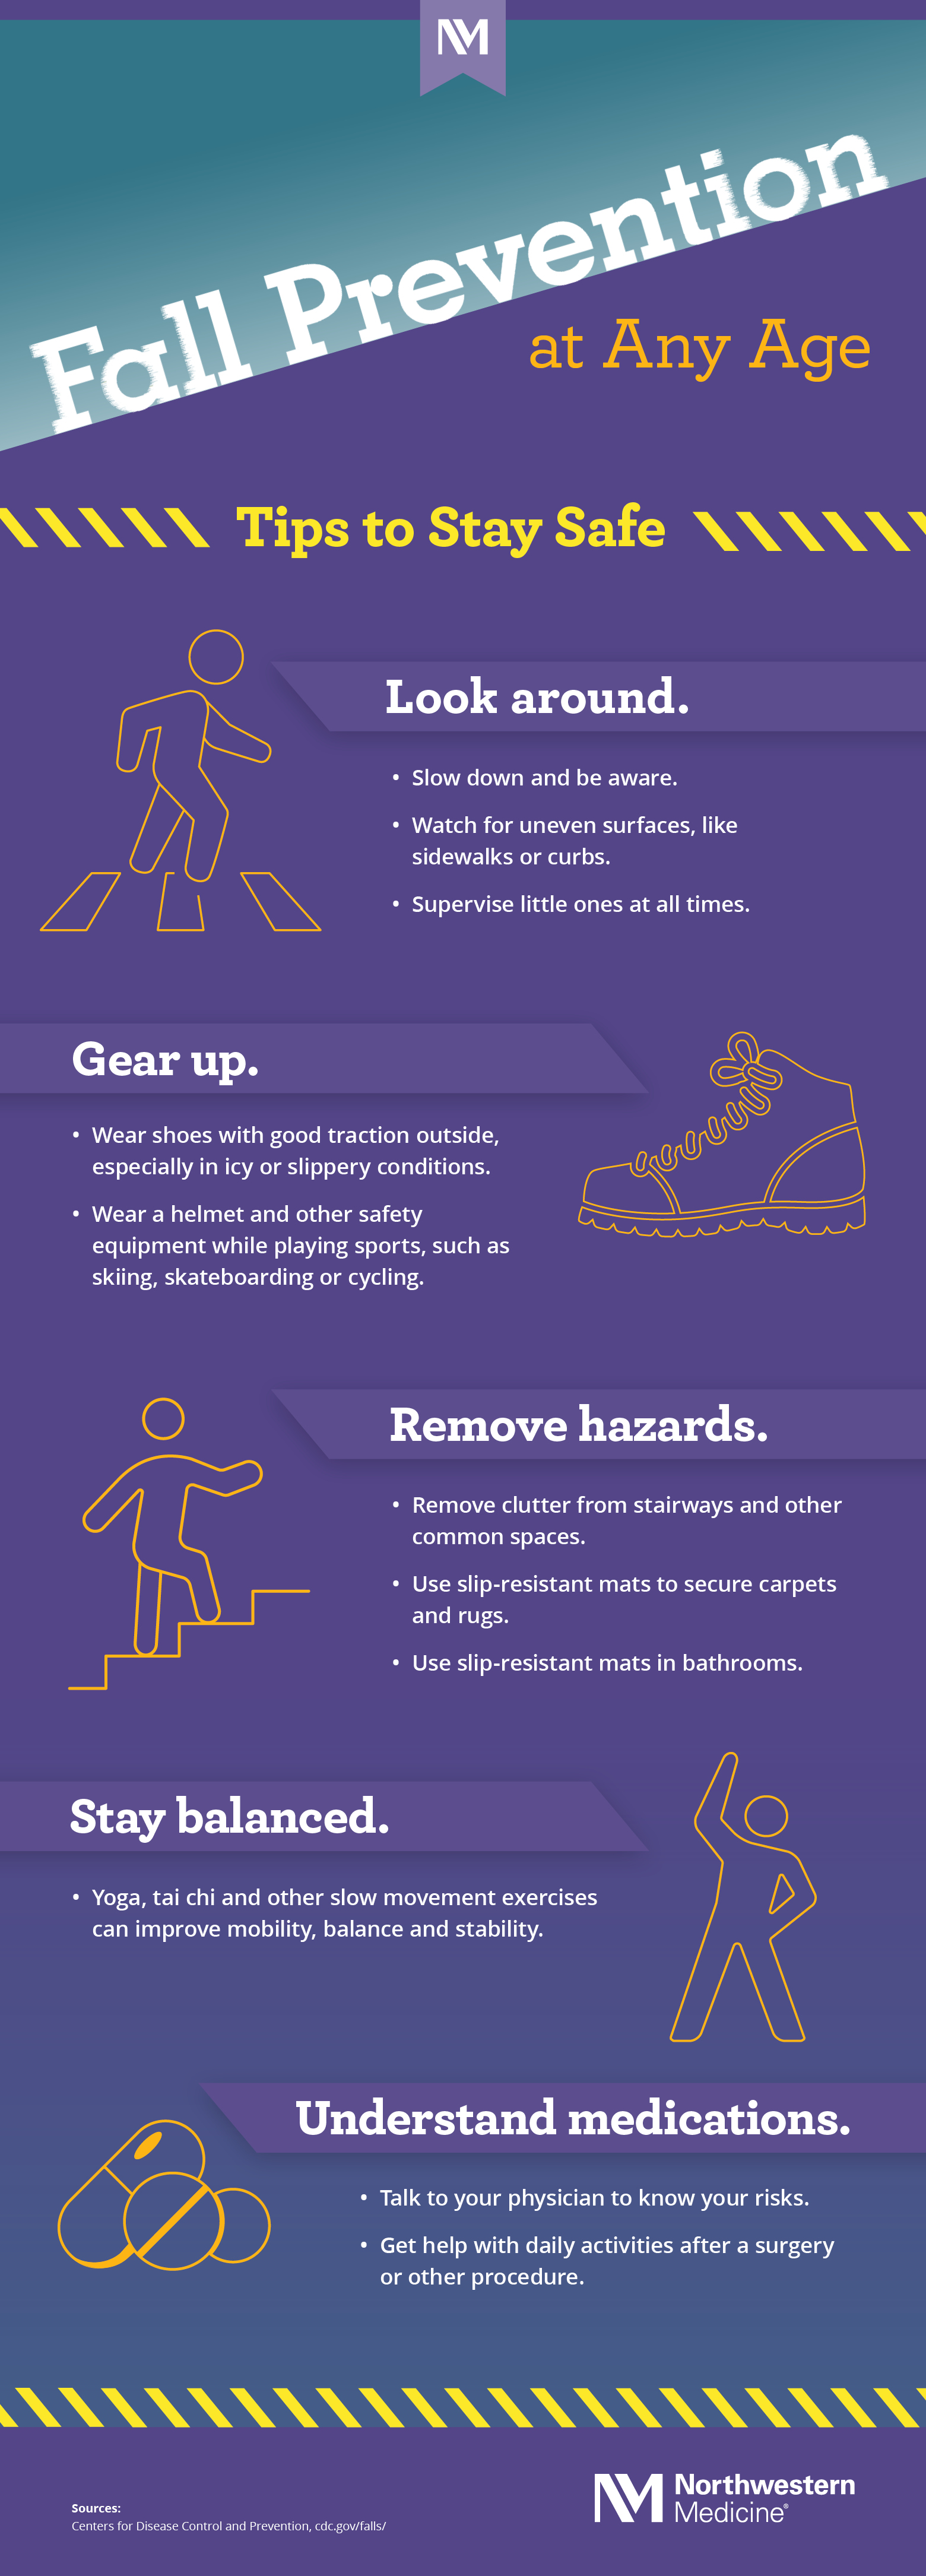 Preventing Falls at All Ages [Infographic] Northwestern Medicine